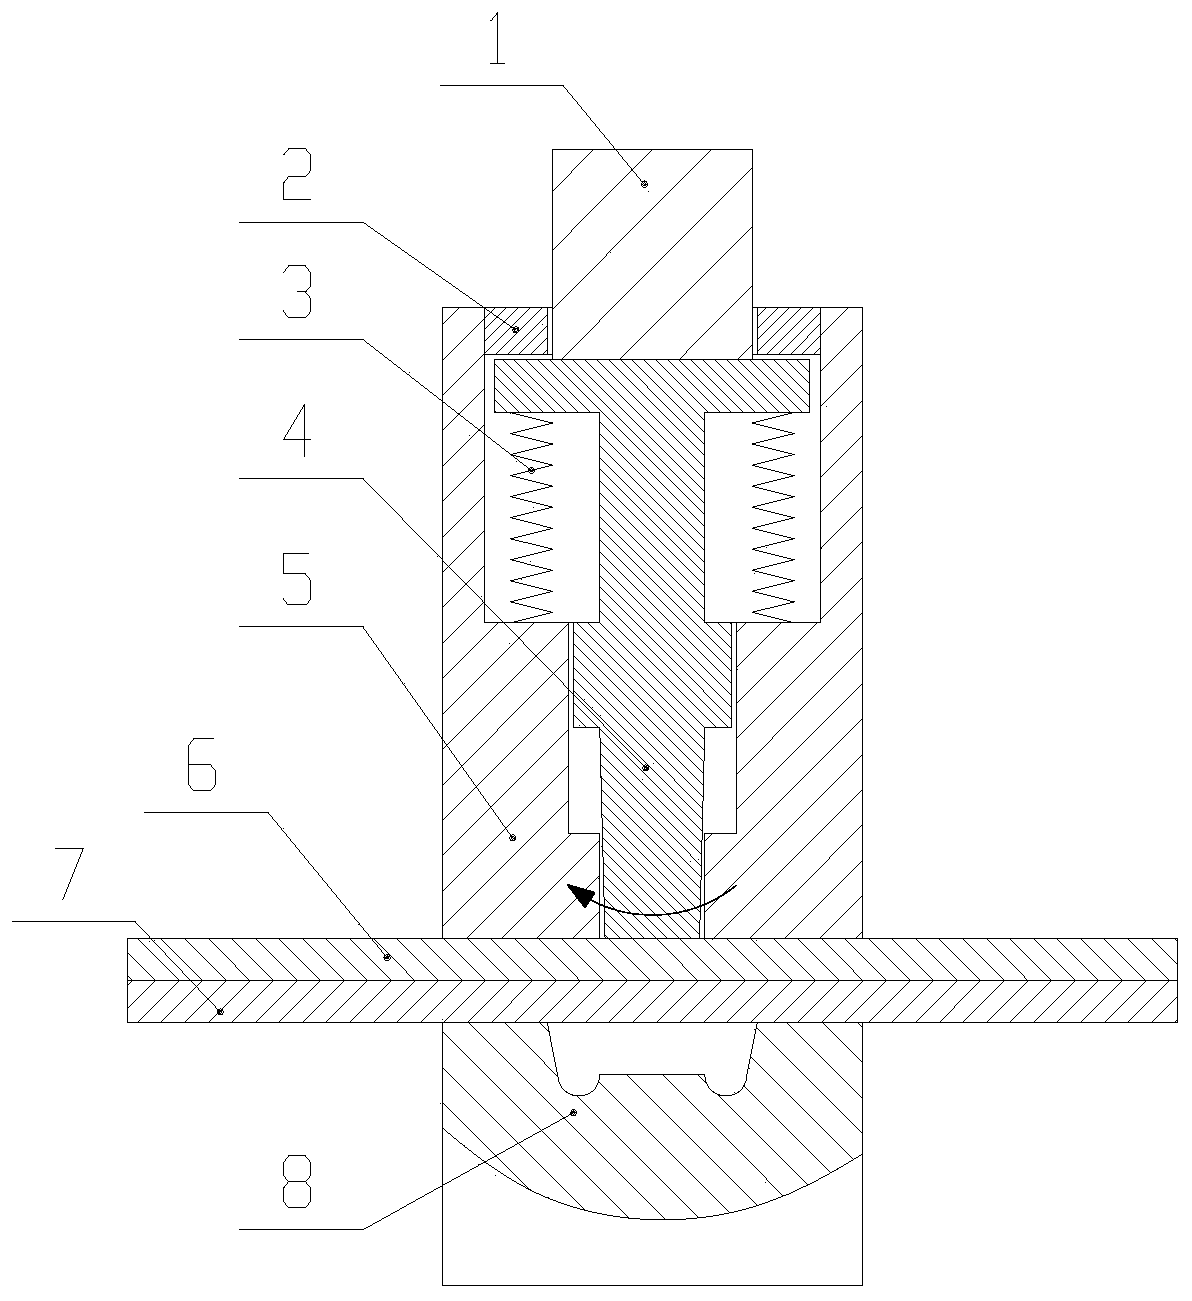 A kind of integral die friction rivetless connection method for lightweight plates